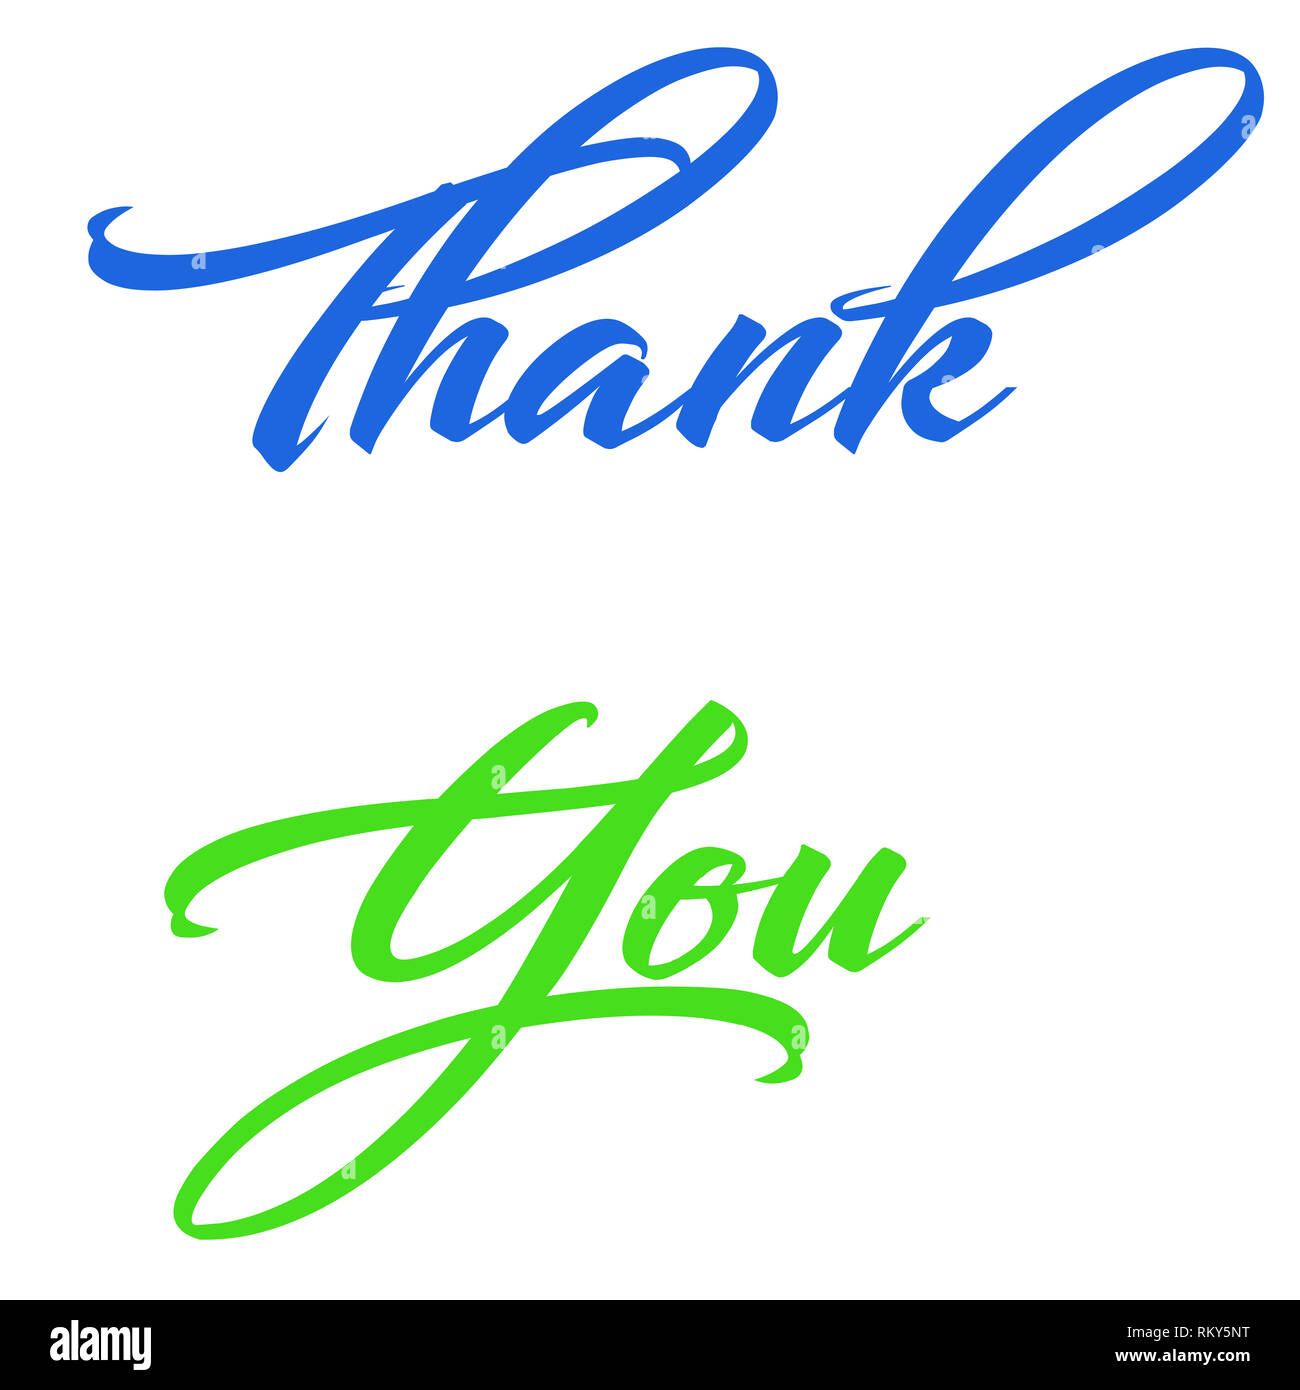 Thank you greetings and wishes Stock Photo